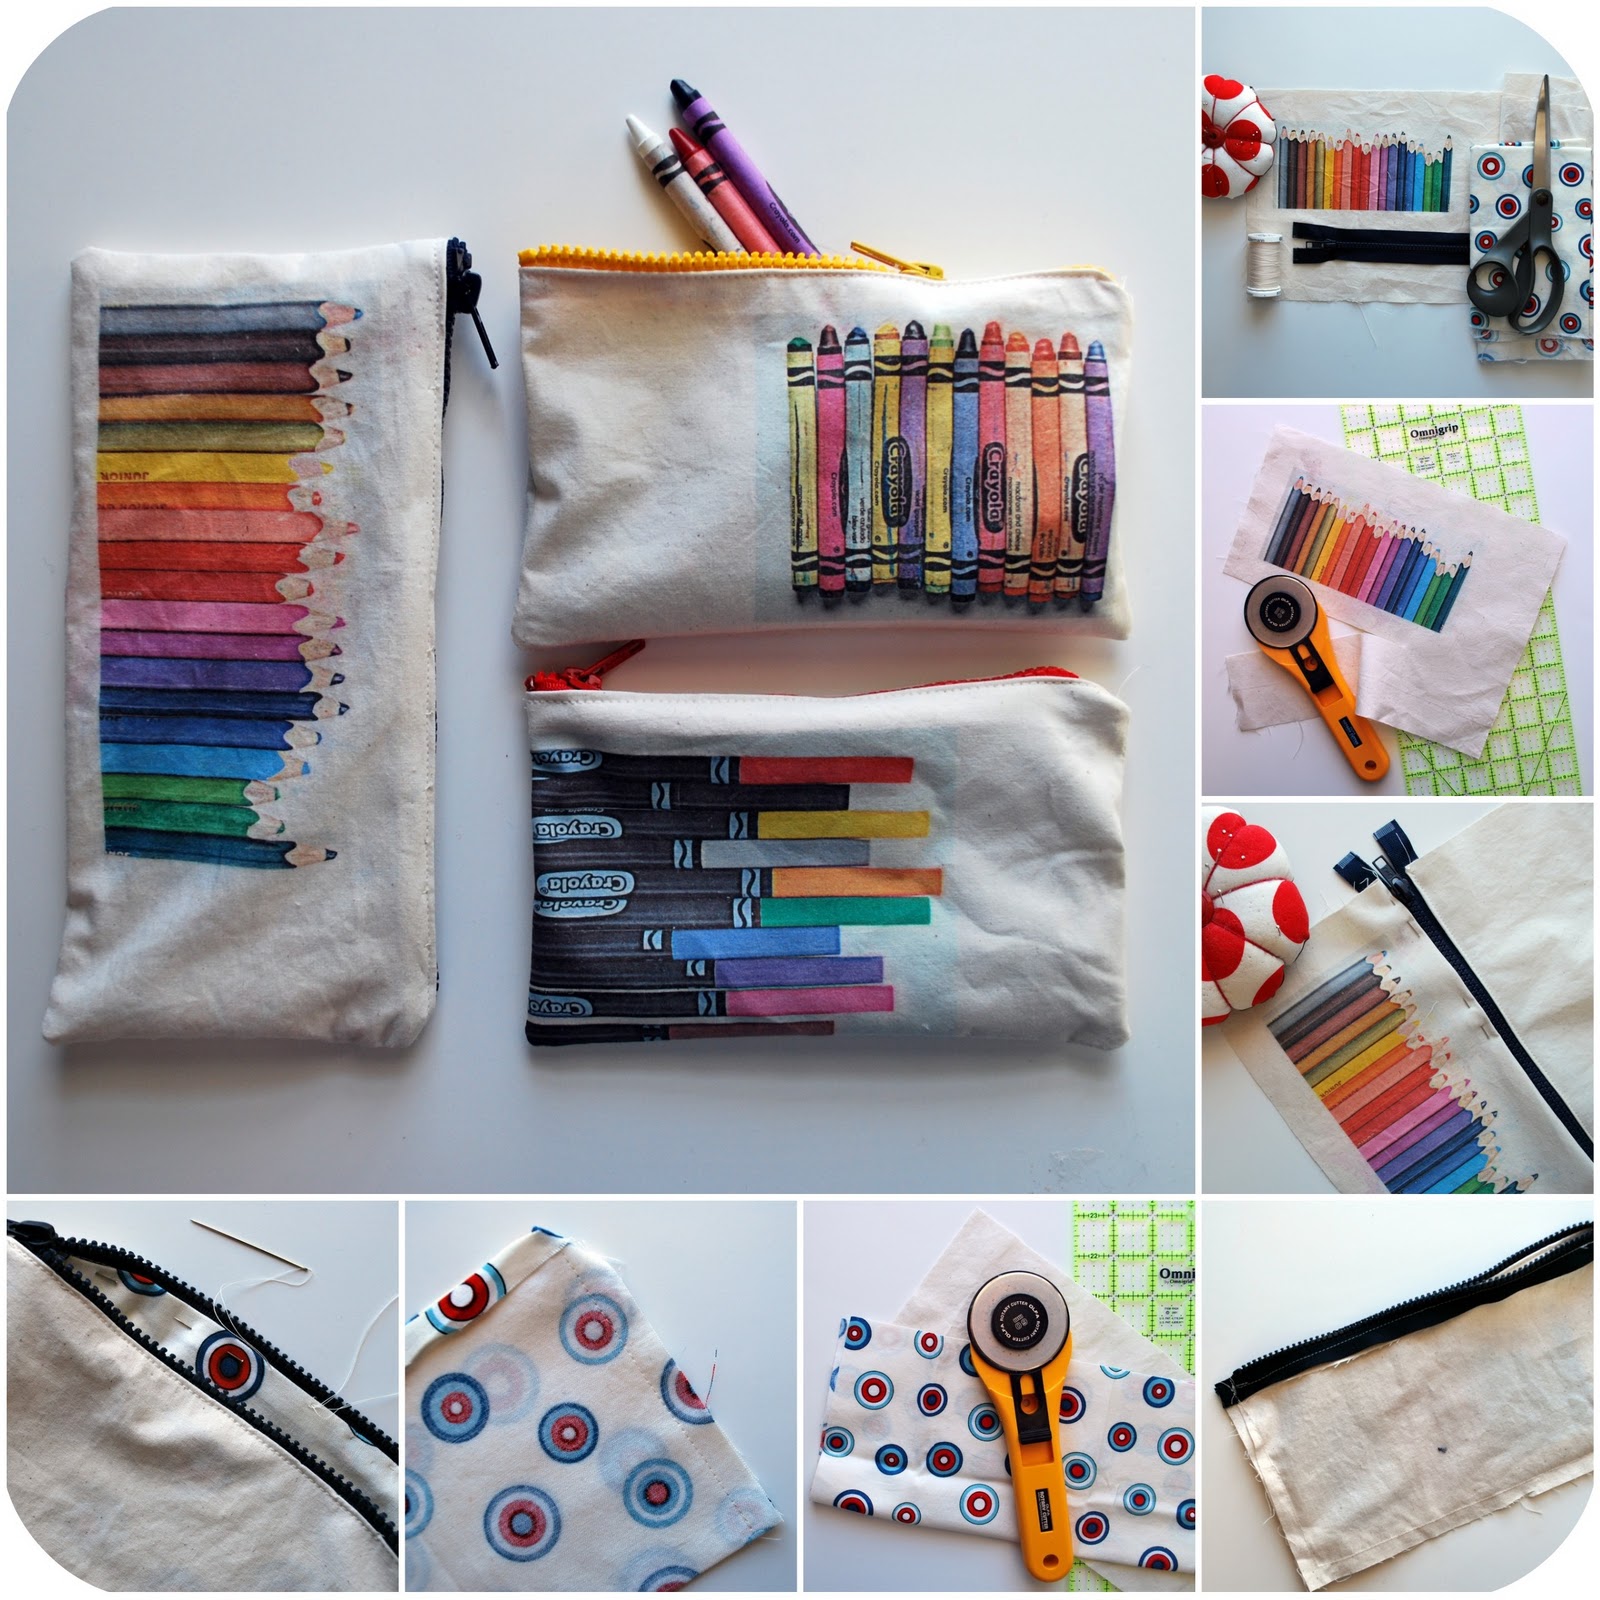 Chez Beeper Bebe: Over at Whip Up Again Today: Make an Art Supply